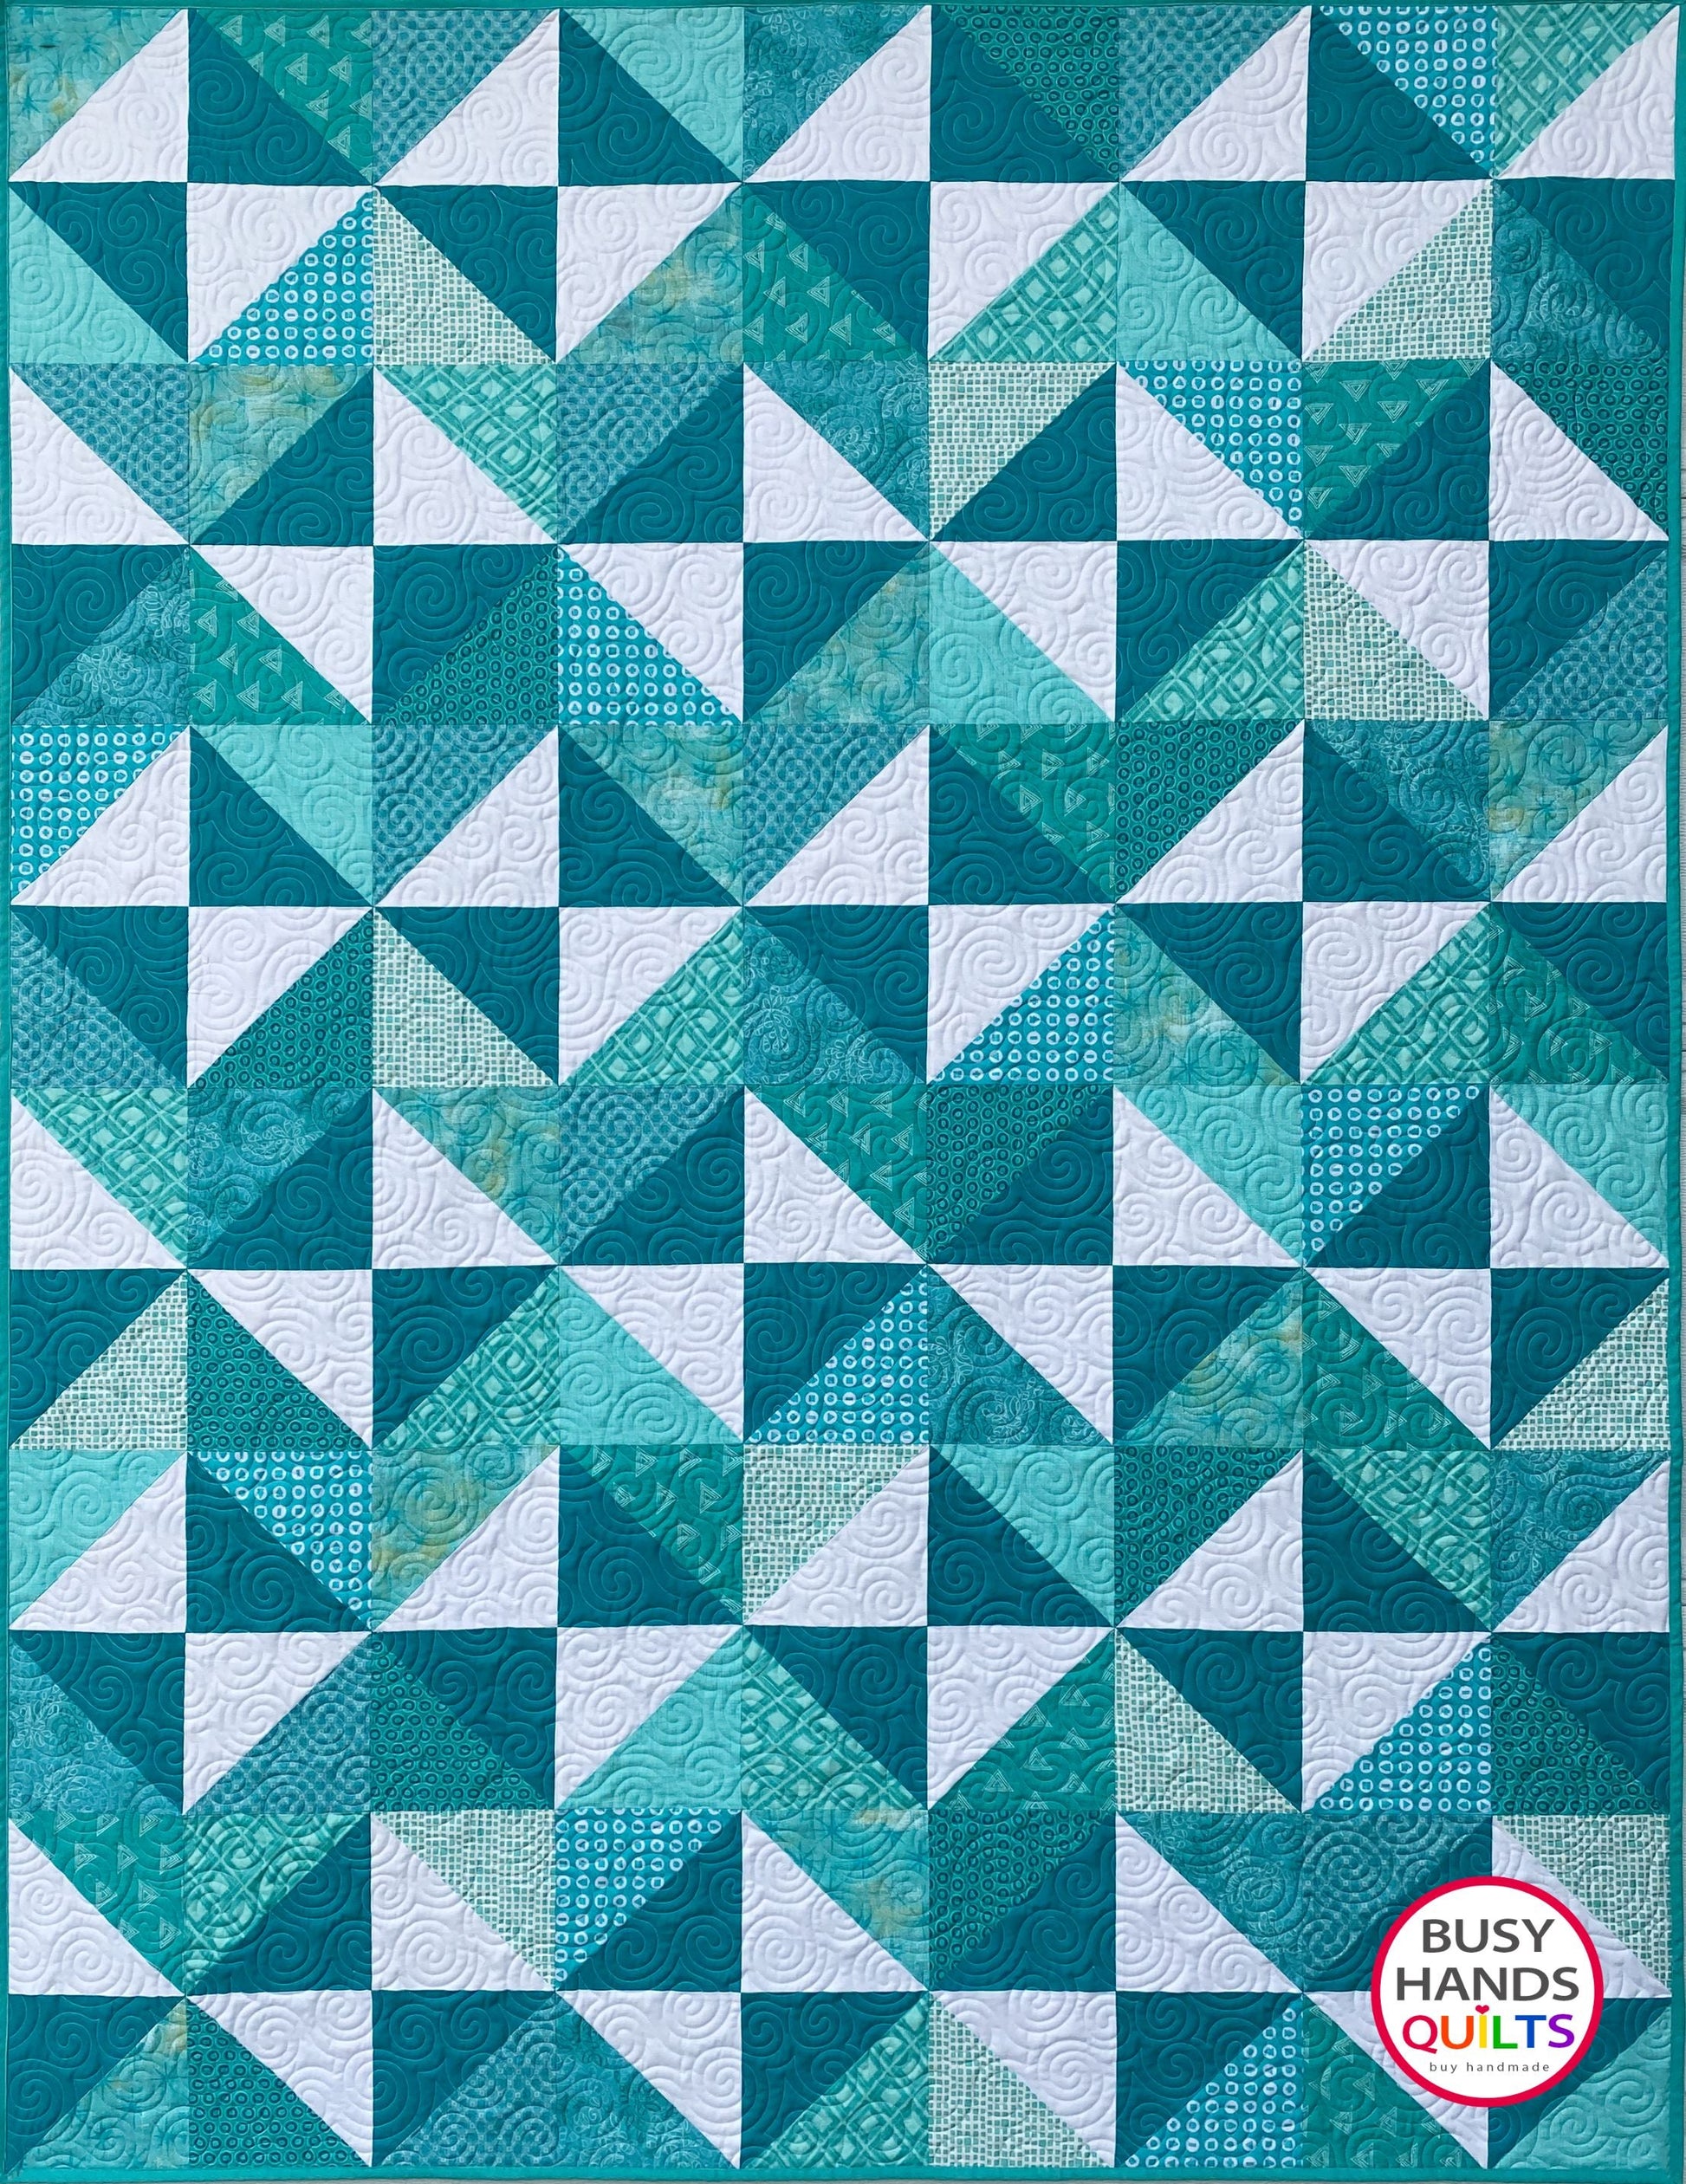 Summer Breeze Quilt Pattern PDF DOWNLOAD Busy Hands Quilts $12.99